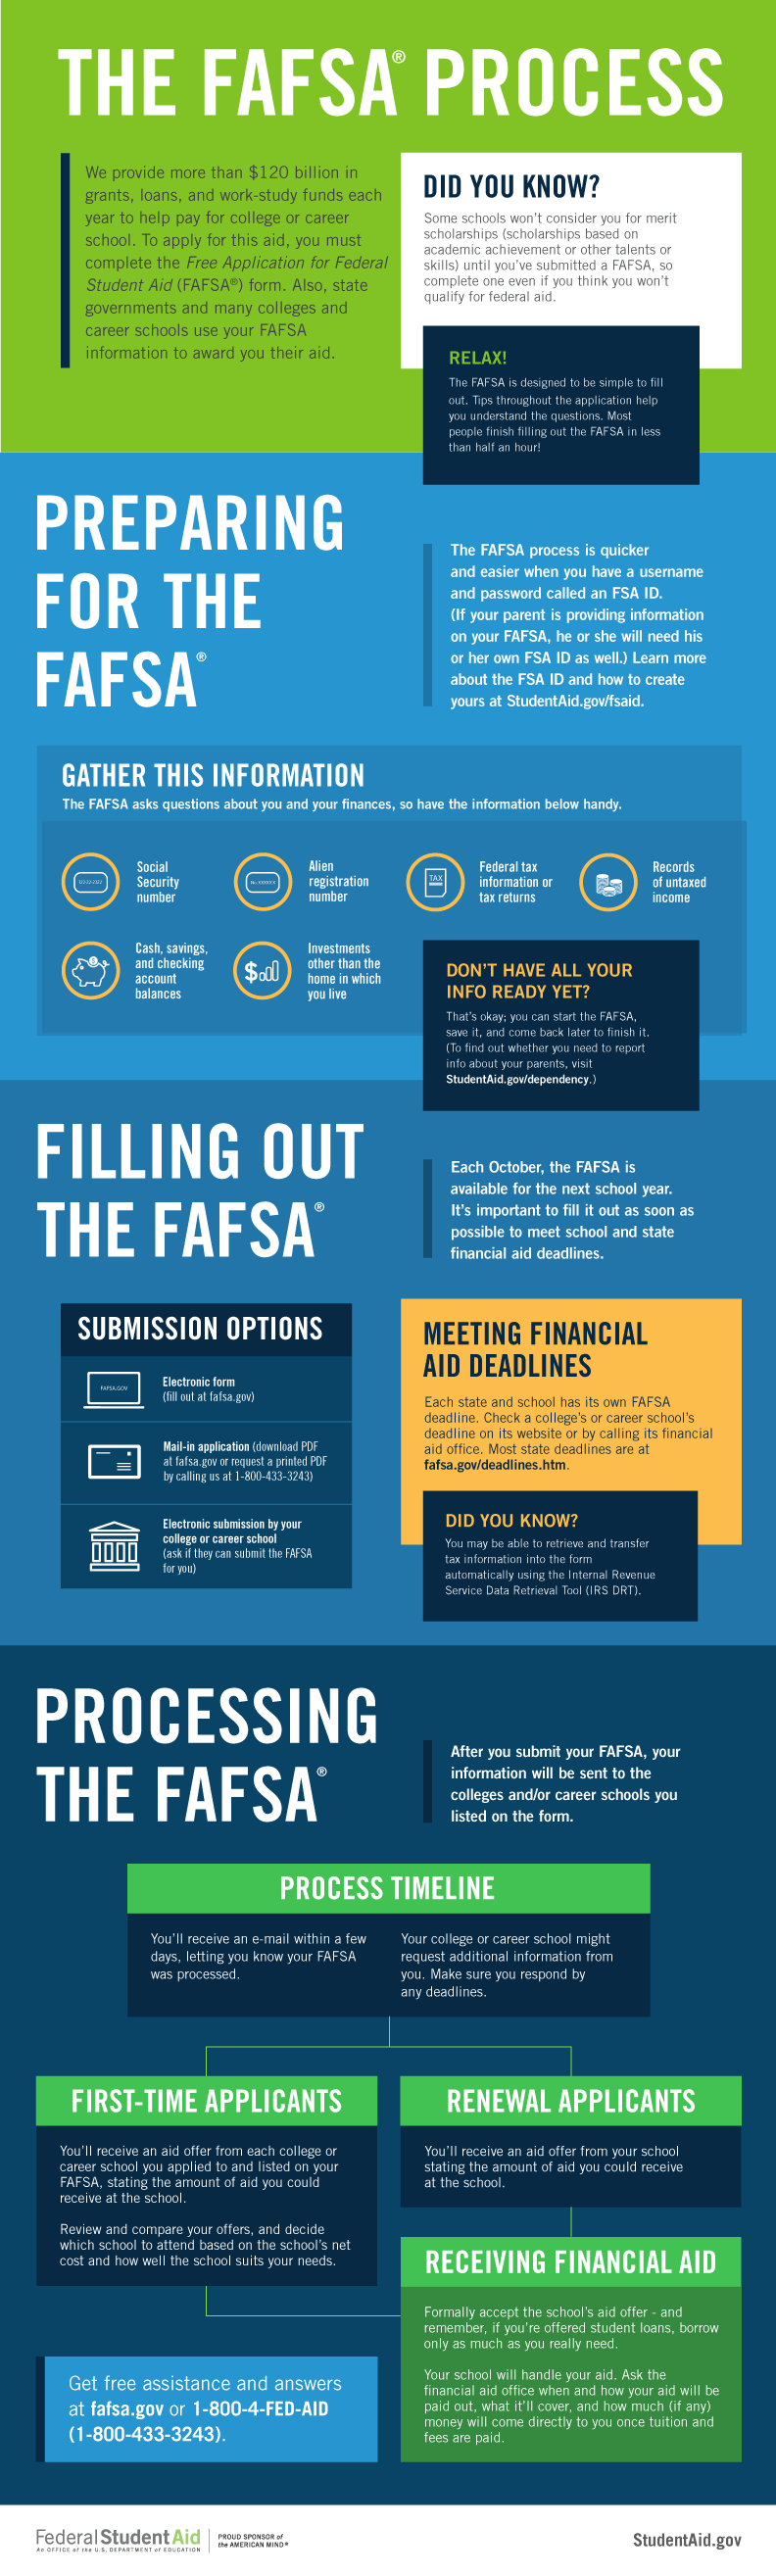 Information about the FAFSA Process. For more information, visit https://StudentAid.gov